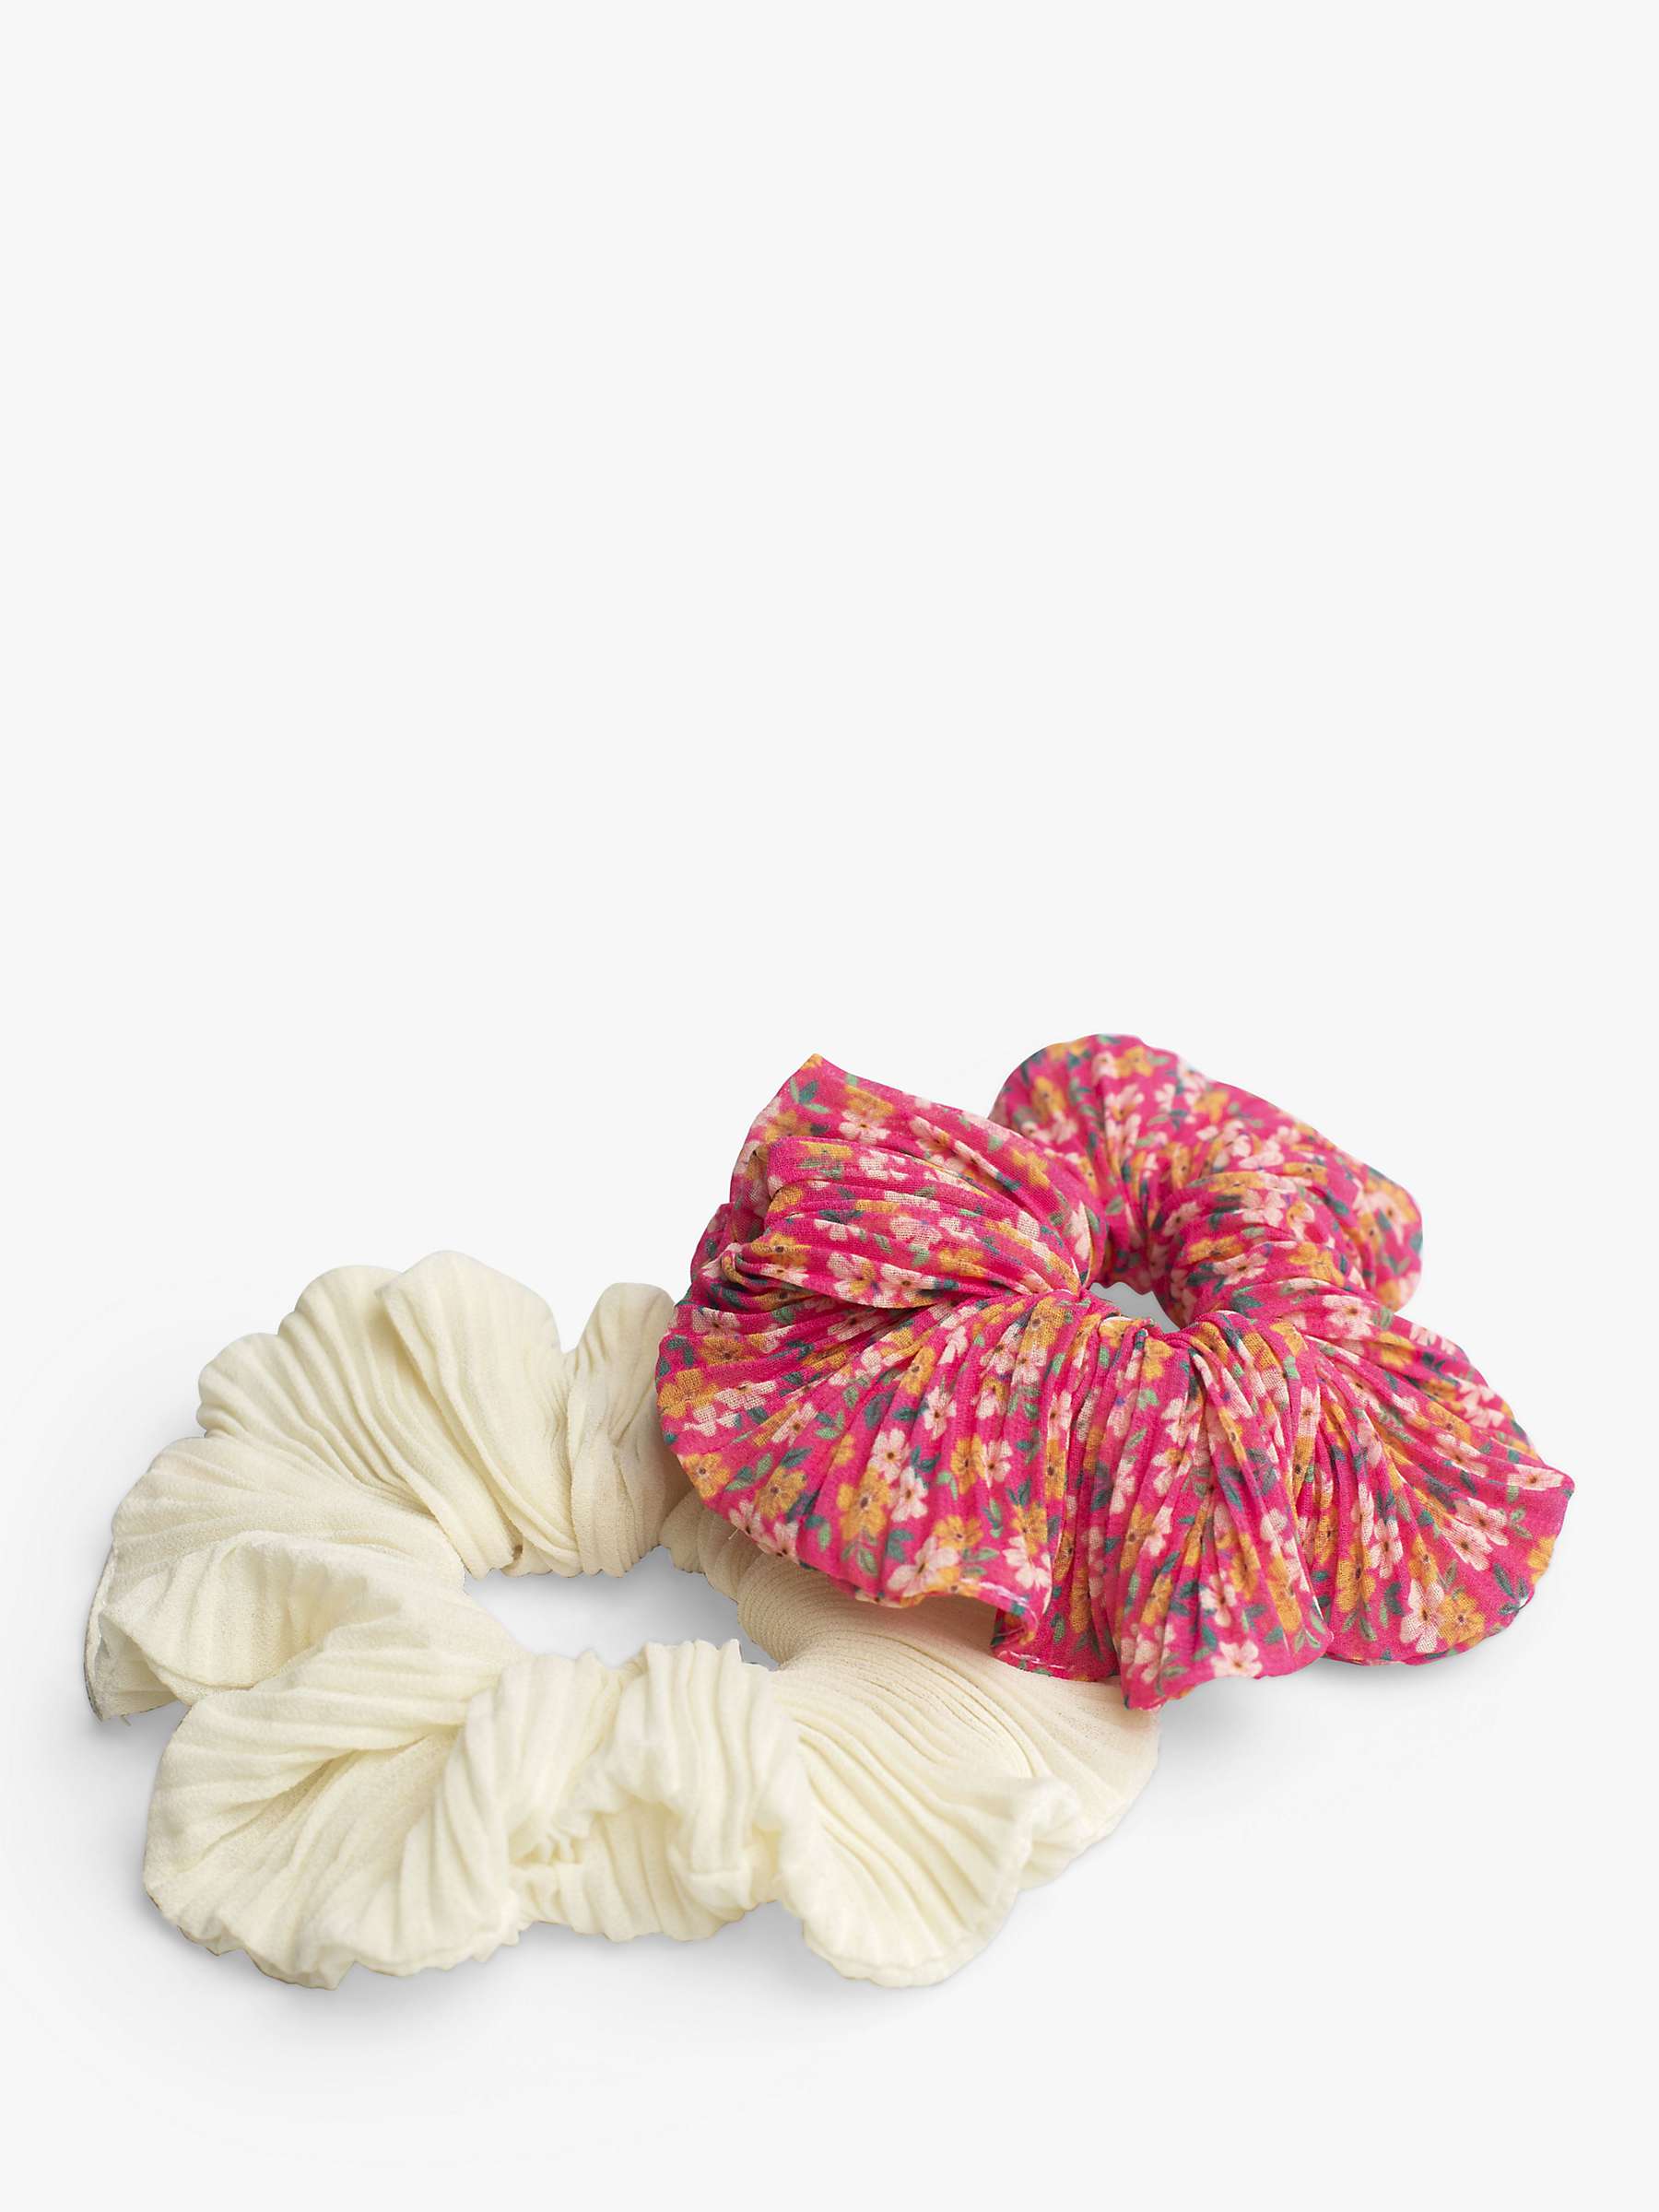 Buy Bloom & Bay Zahara Pleated Chiffon Scrunchies, Pack of 2, Fuchsia Floral/Cream Online at johnlewis.com